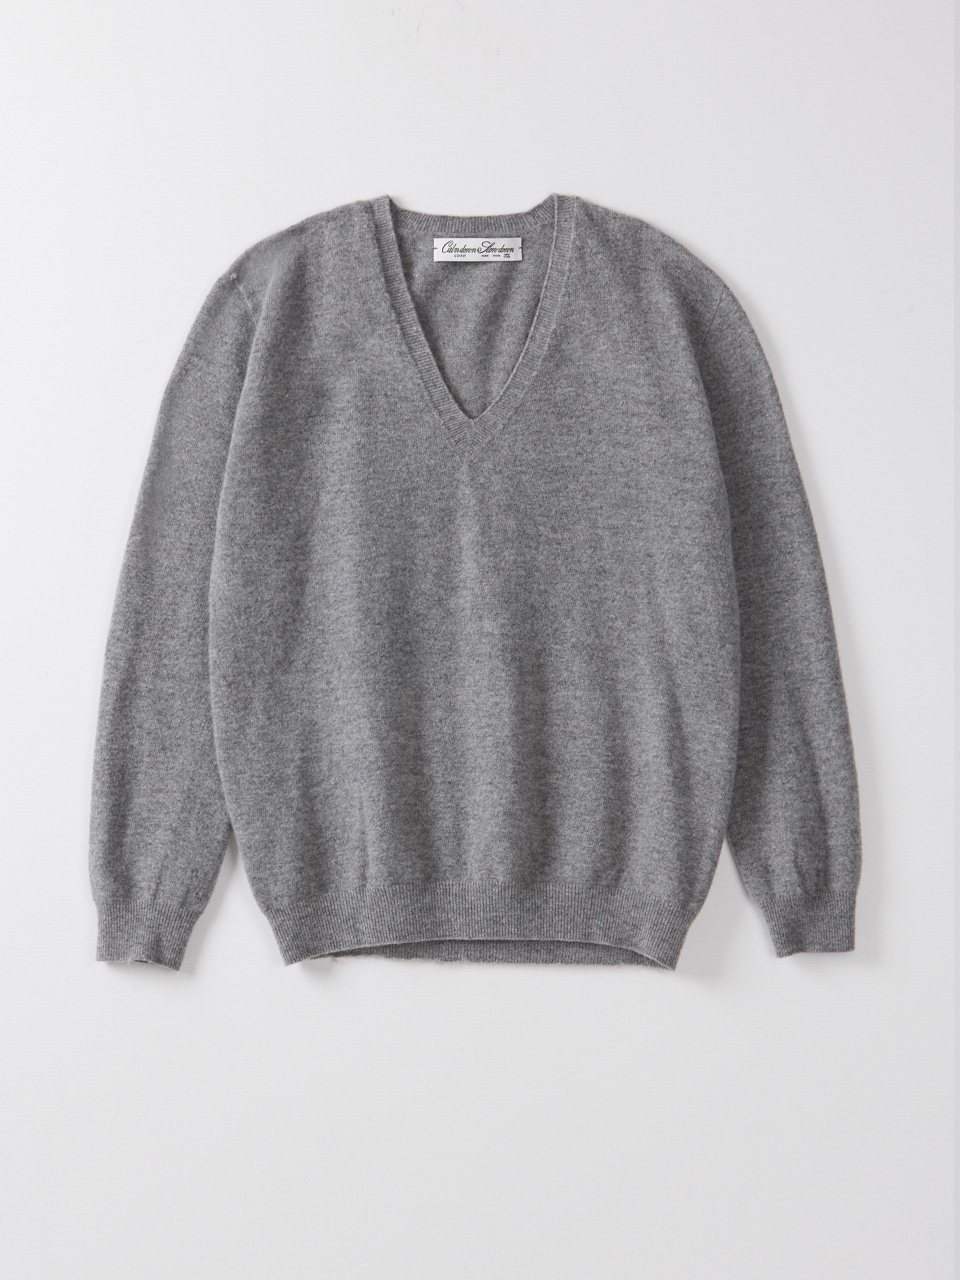 Wool cashmere v-neck knit_grey (10월 초 재입고 예정)